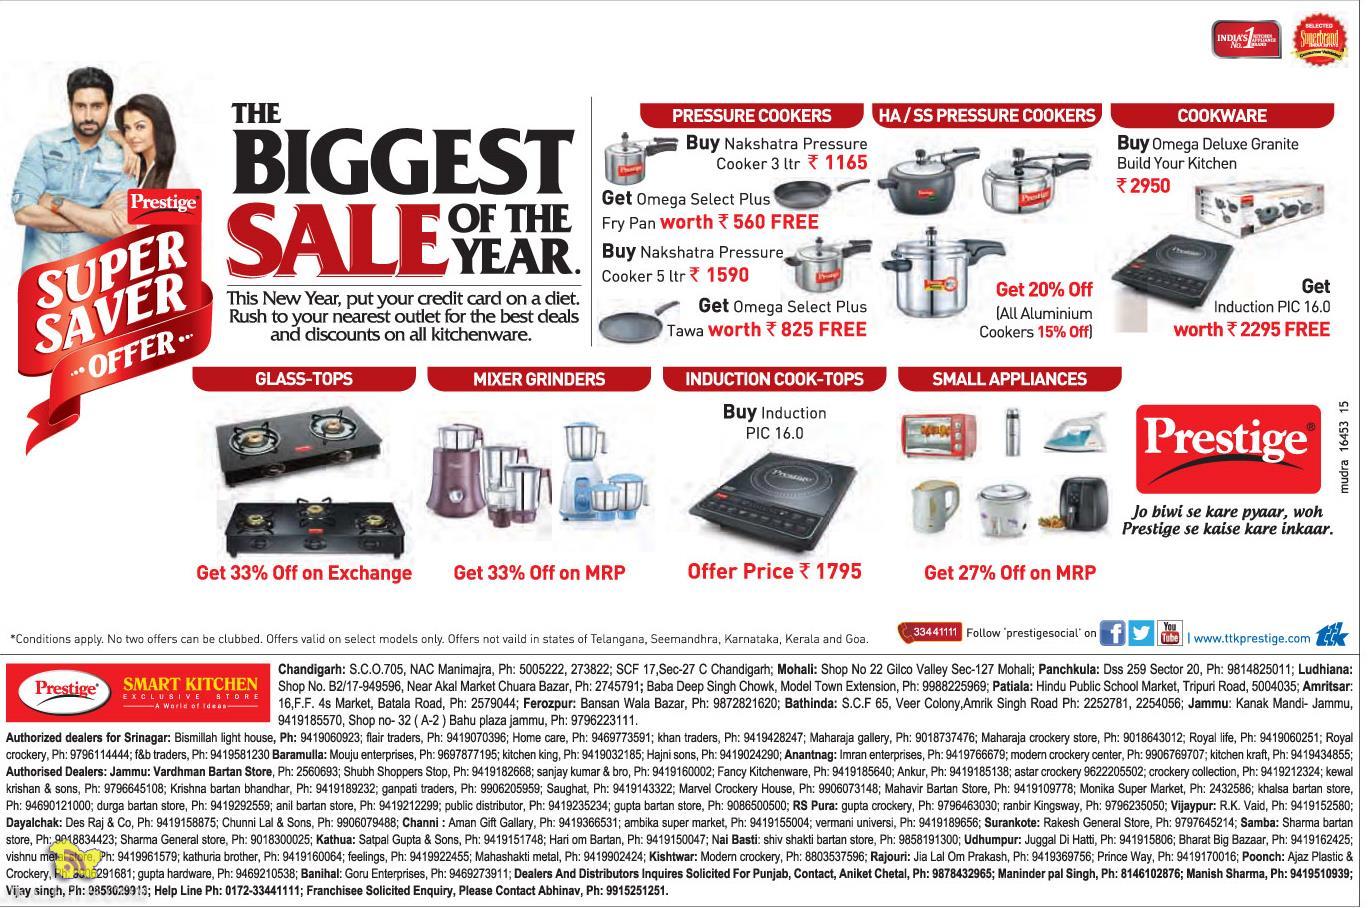 Prestige The Biggest sale of the year